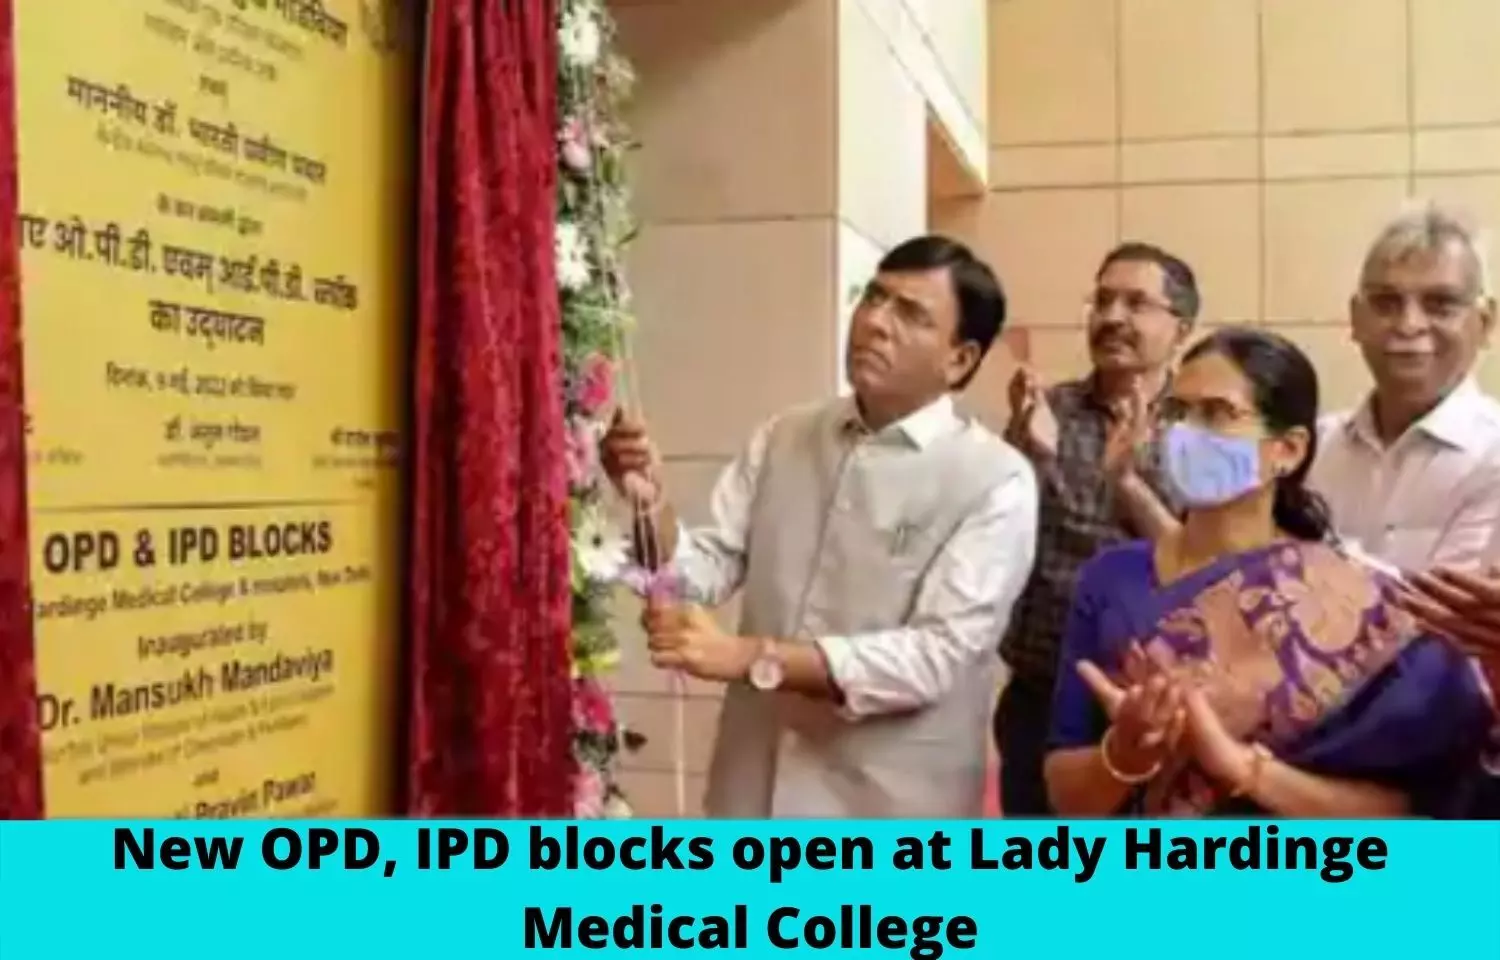 New OPD, IPD blocks open at Lady Hardinge Medical College